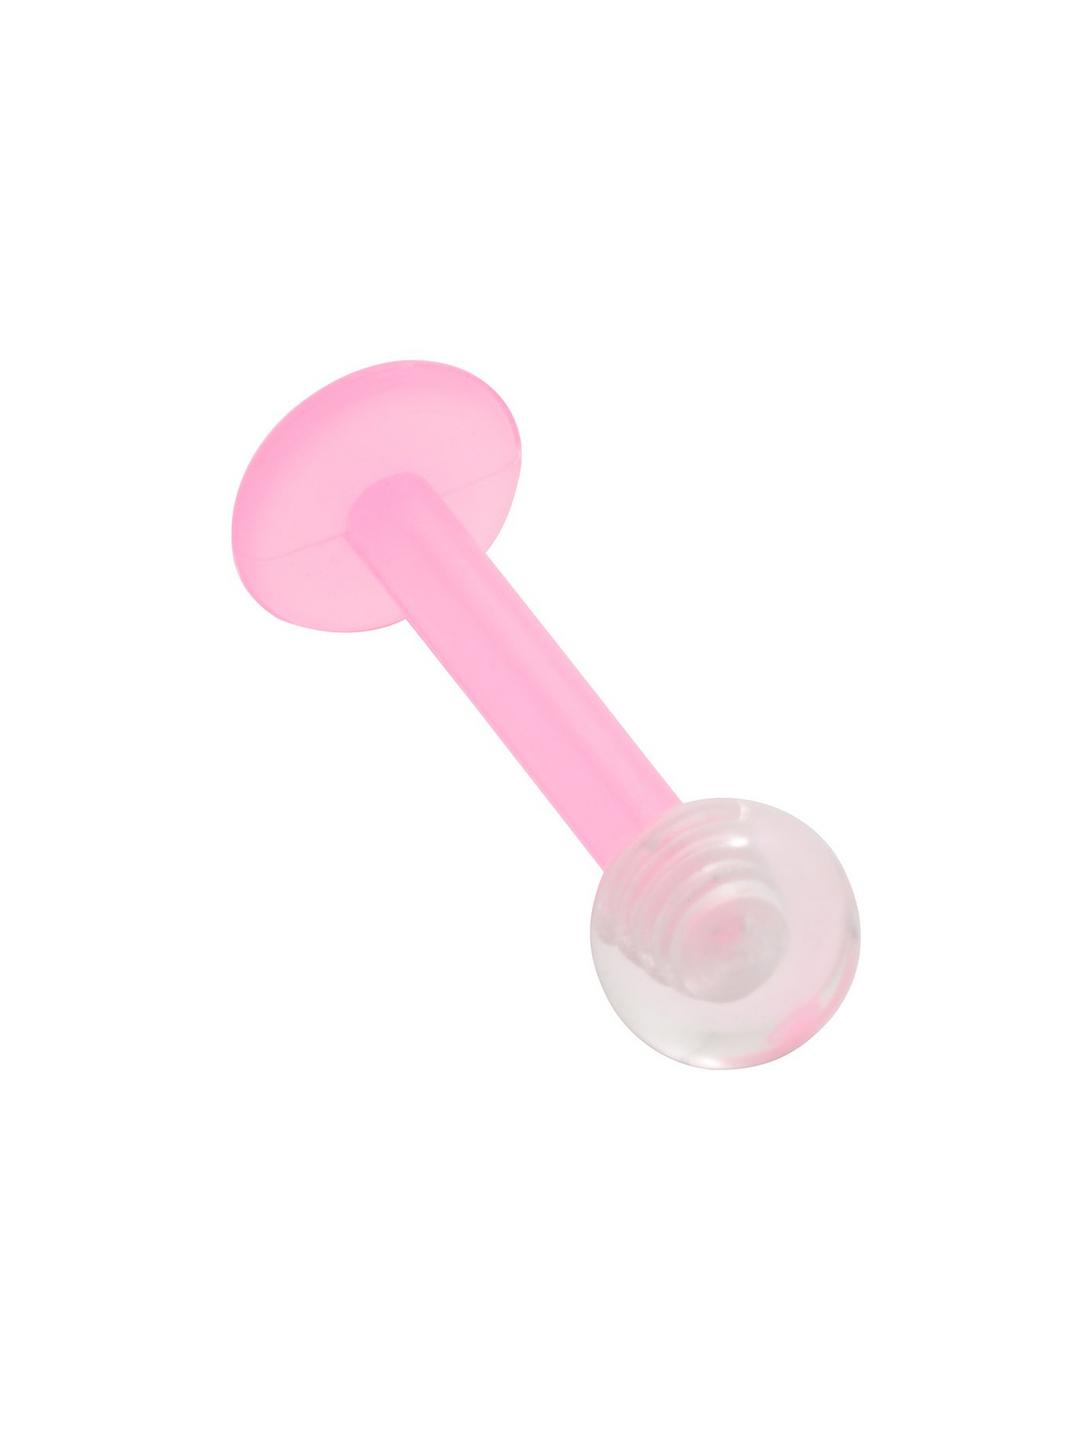 14G 3/8 Acrylic Pink Clear Ball Labret Stud, PINK, hi-res